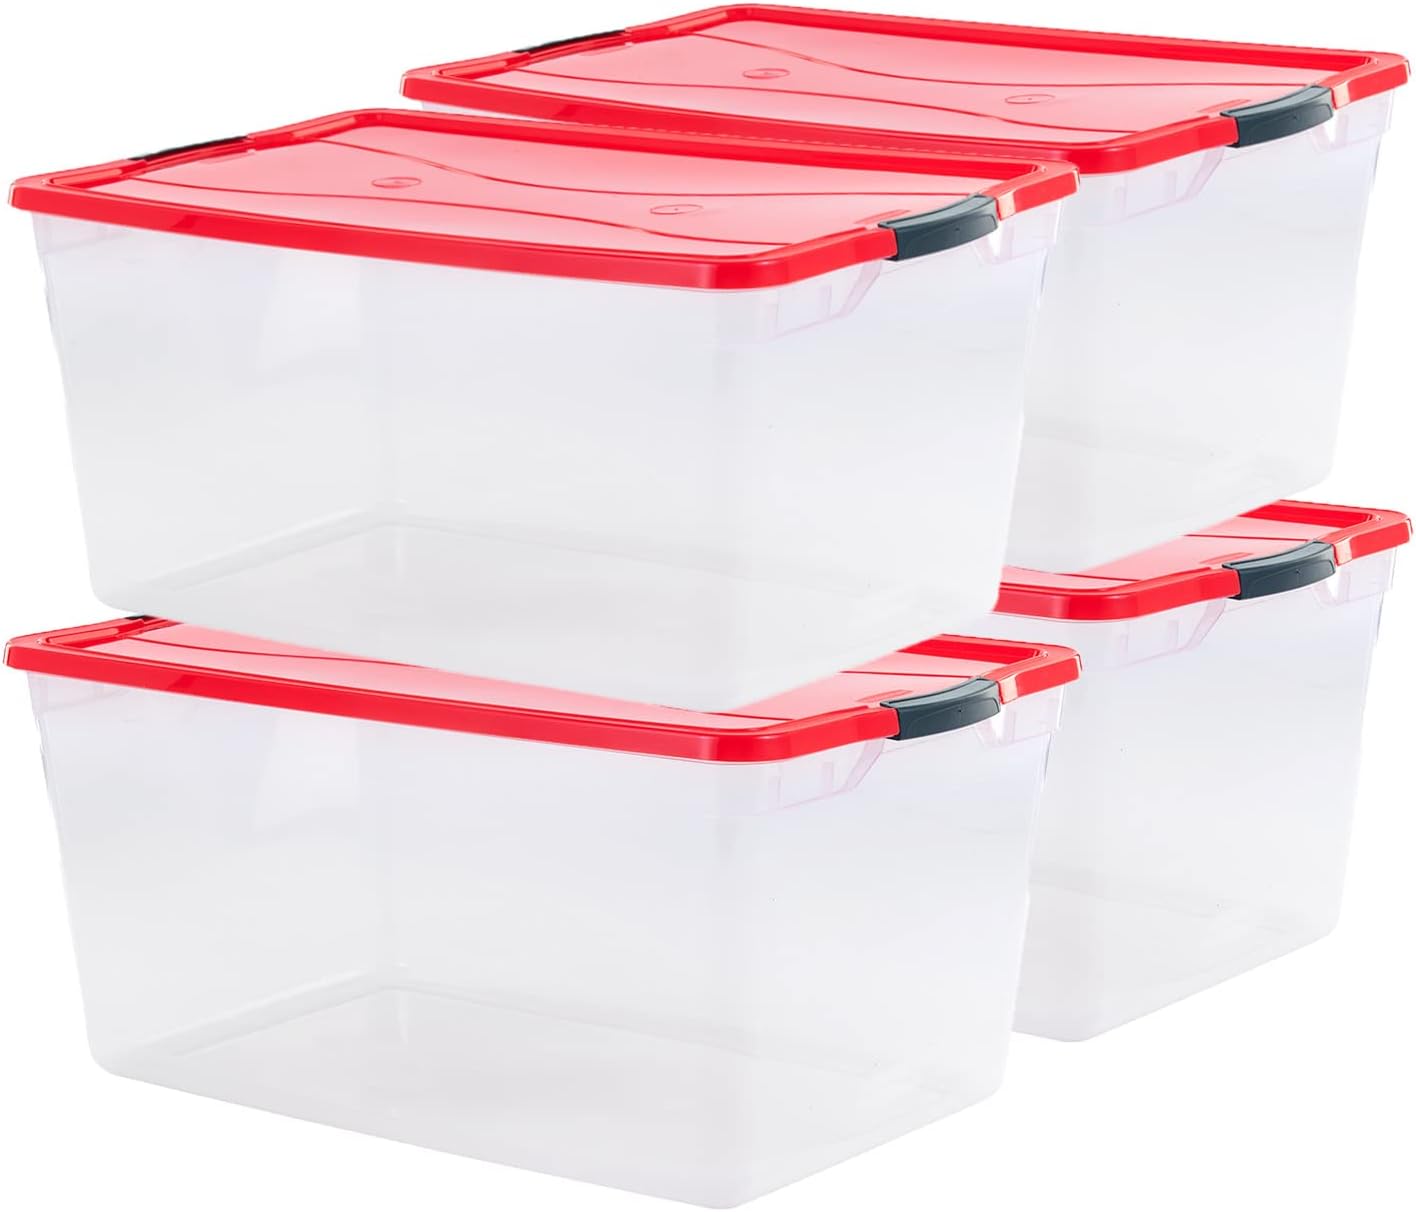 Rubbermaid Cleverstore Clear 71 qt 18 gal, Pack of 4 Holiday Storage Containers